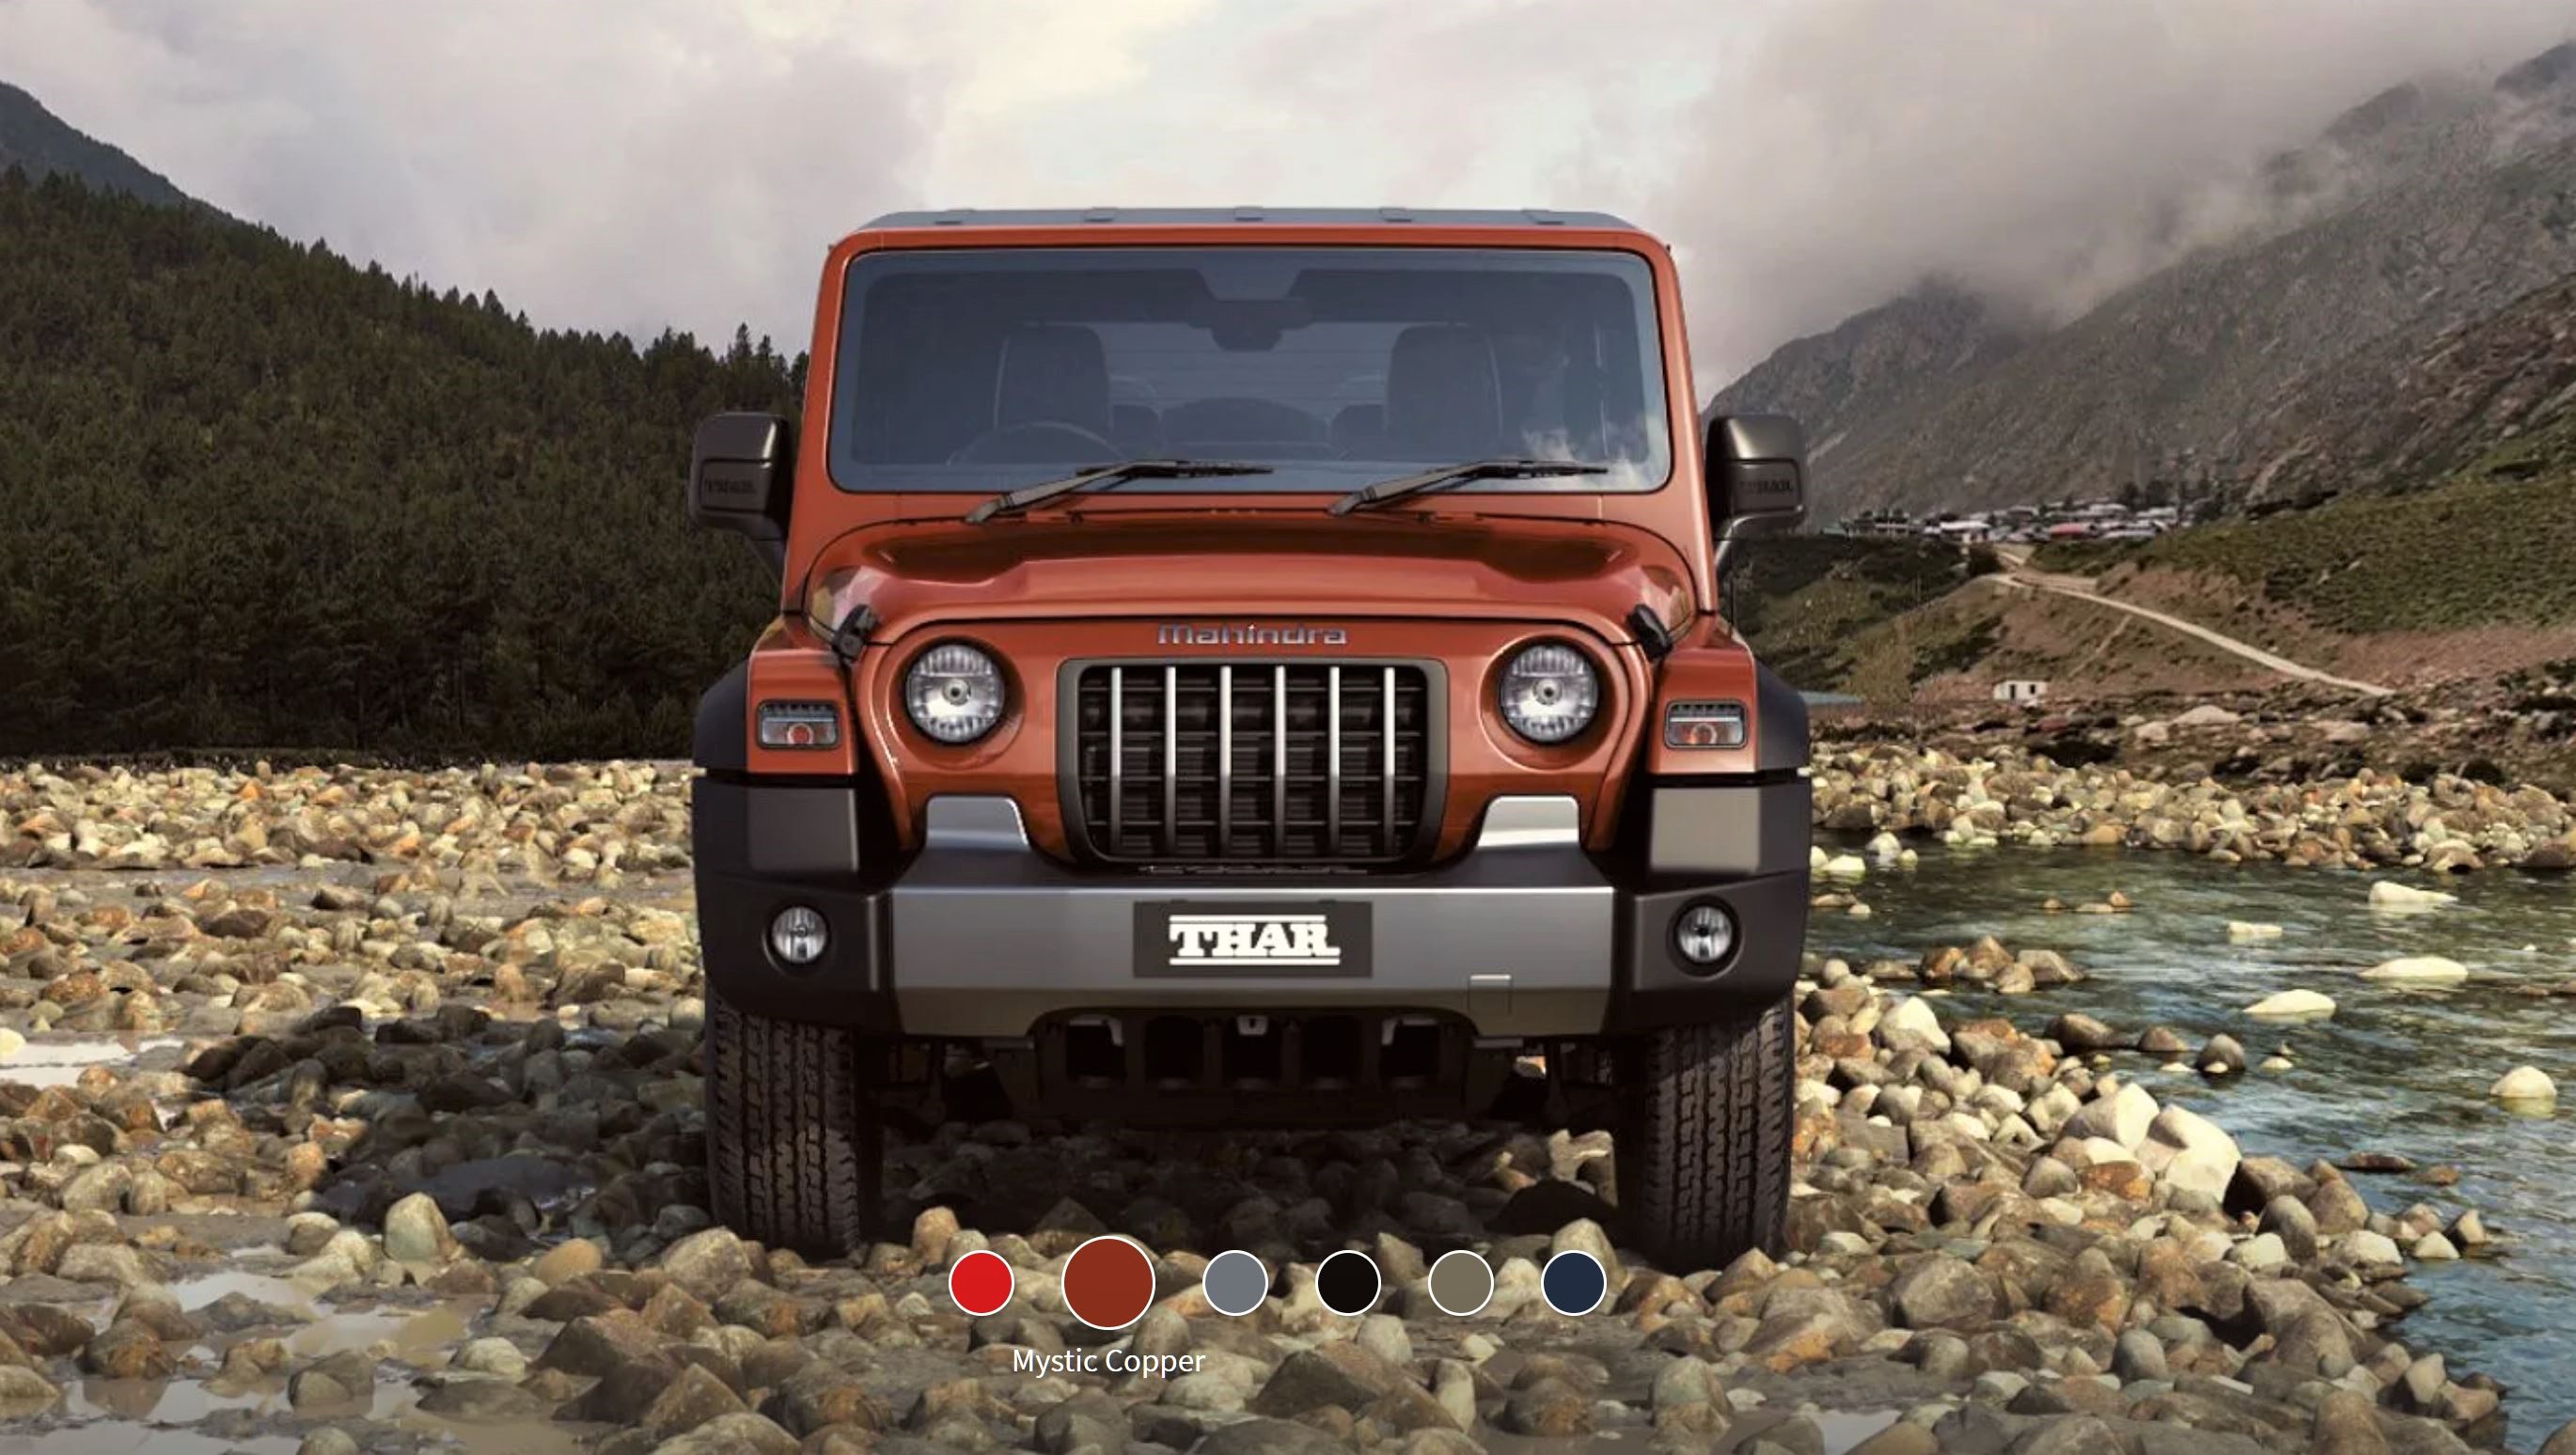 New Mahindra Thar Mystic Copper Front View